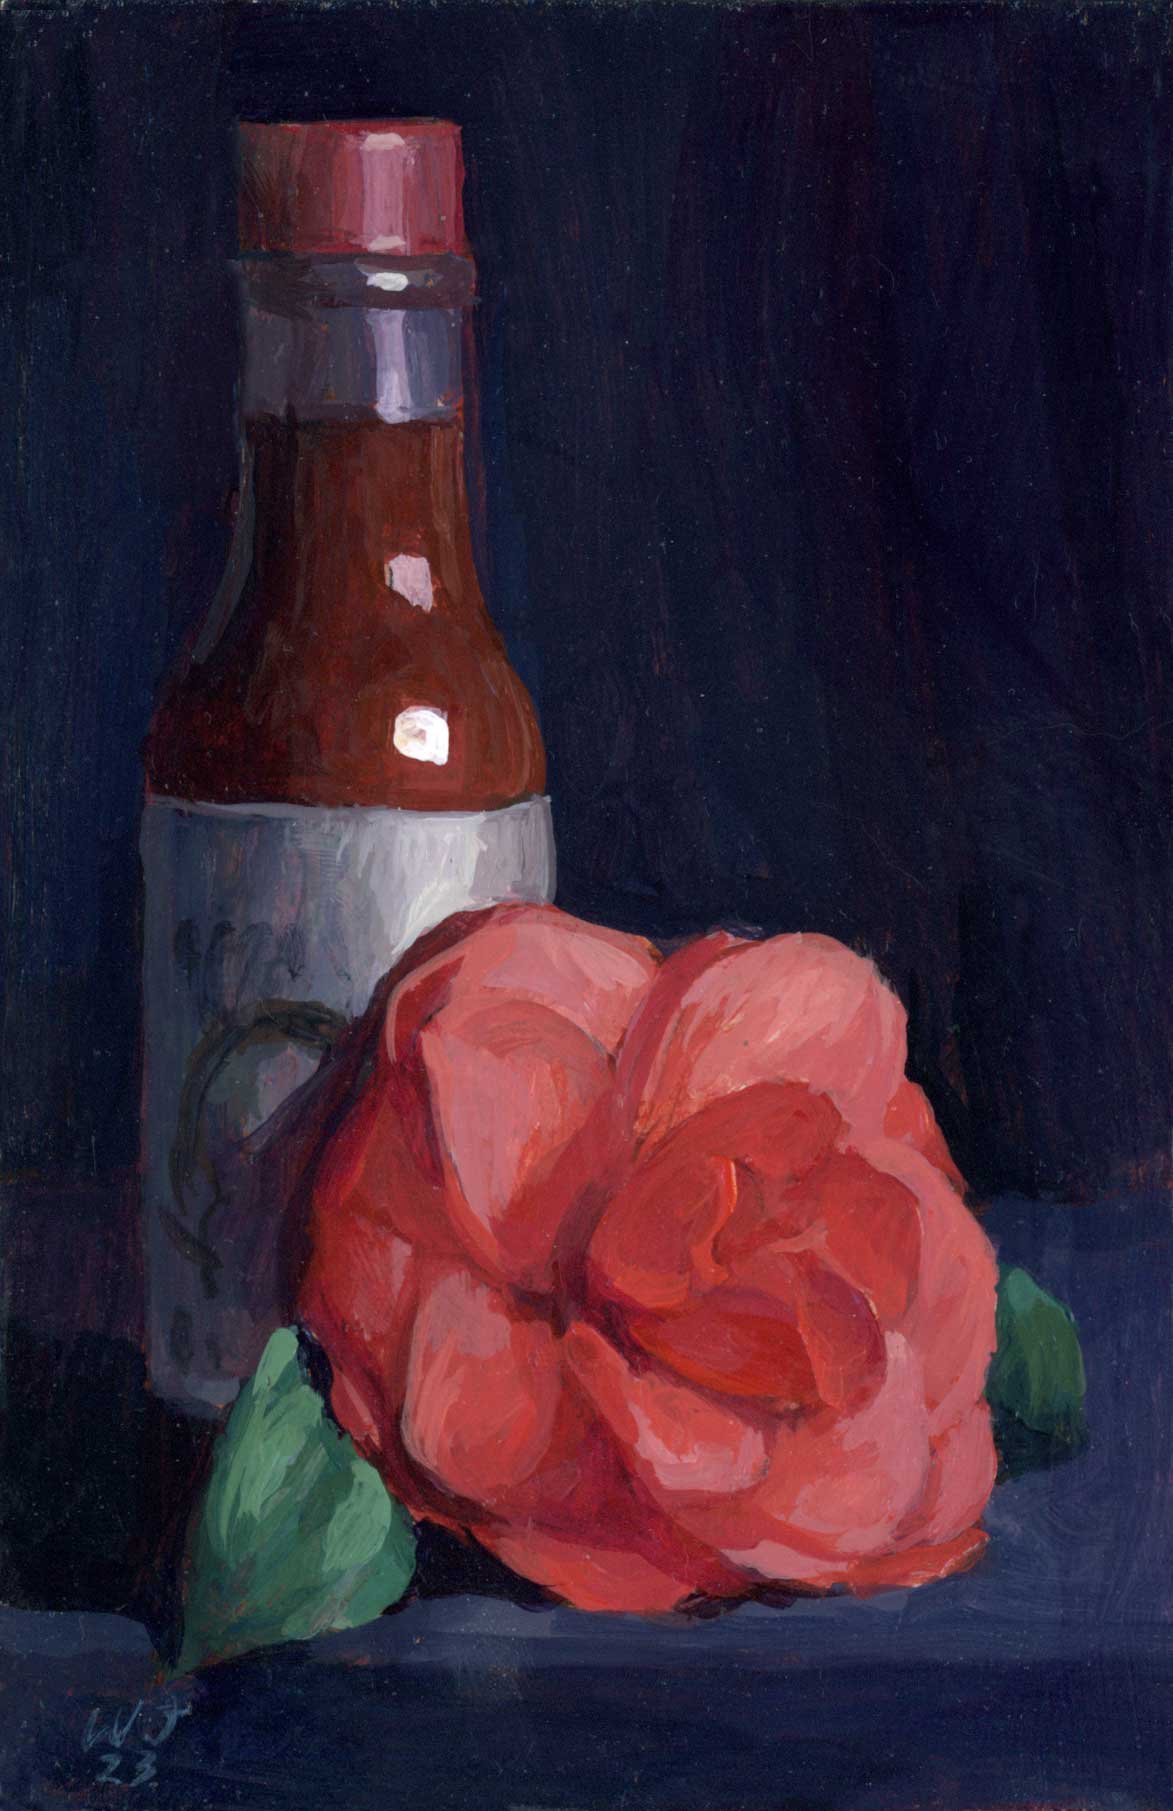 Hot Sauce and Red Camellia by Wayne Jiang